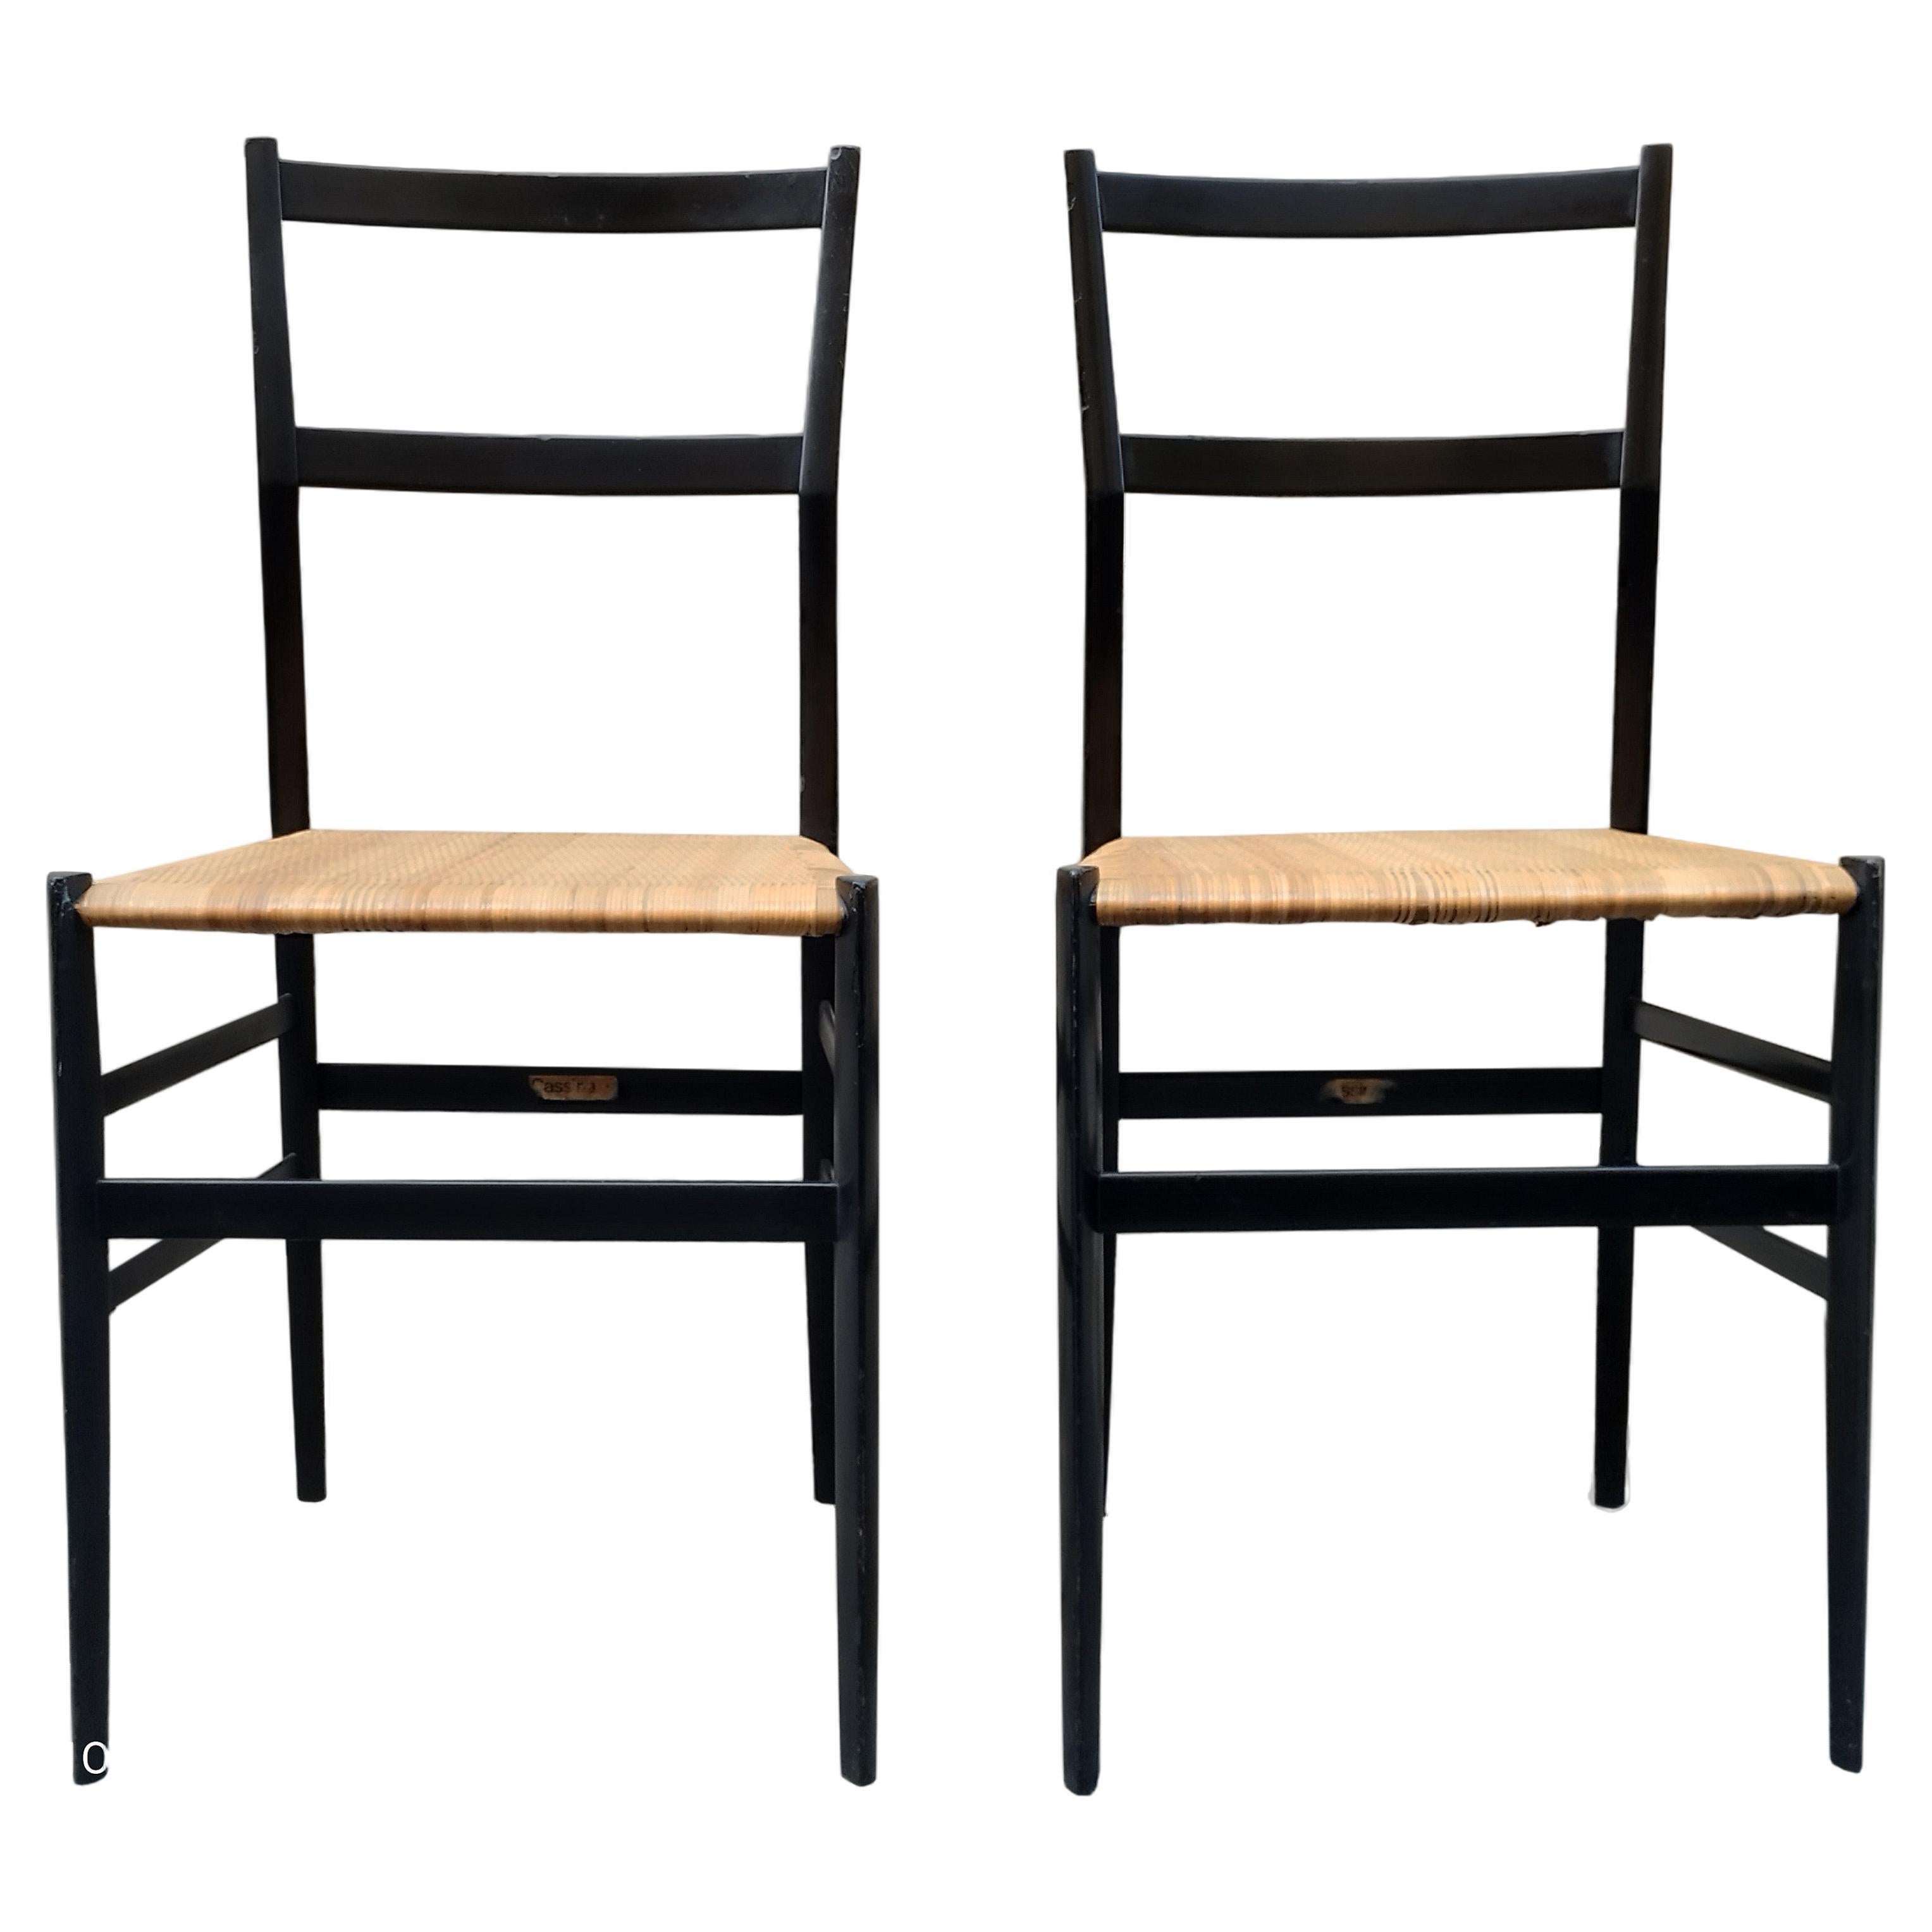 Gio Ponti for Cassina Pair of  "Superleggera" Black Chairs, Italy 1960s For Sale